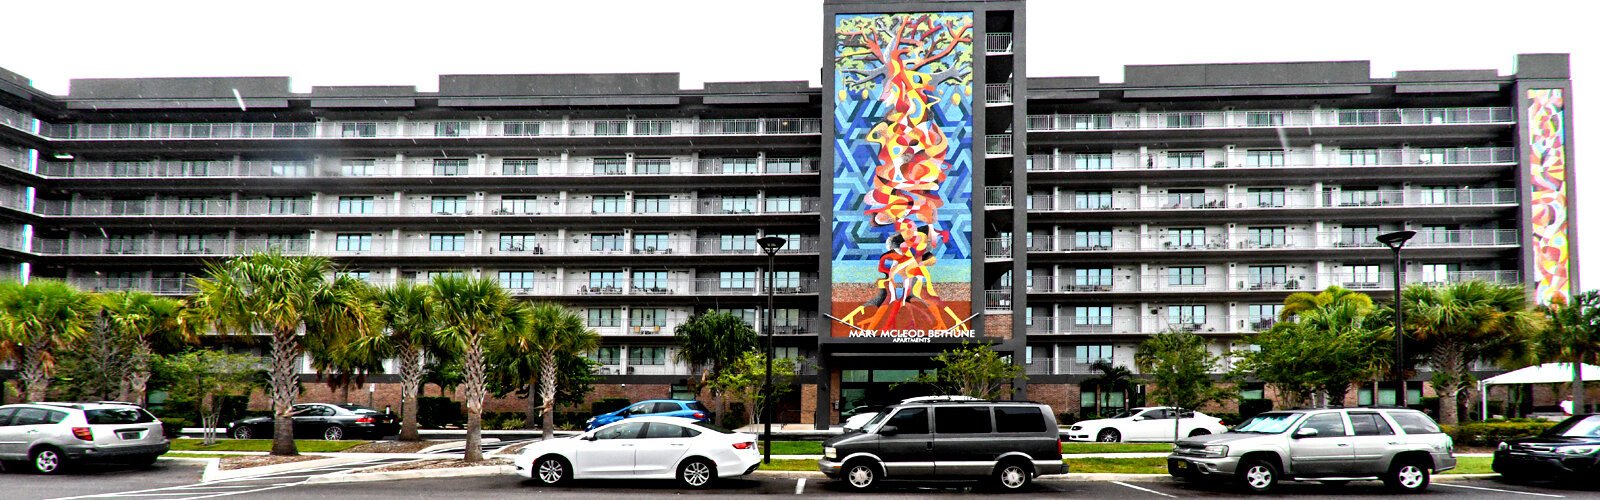 Featuring a grand mosaic artwork designed to honor and preserve history, the Mary McLeod Bethune Apartments offers 160 affordable apartments for active seniors and received a National Green Building Standards Gold Certification.